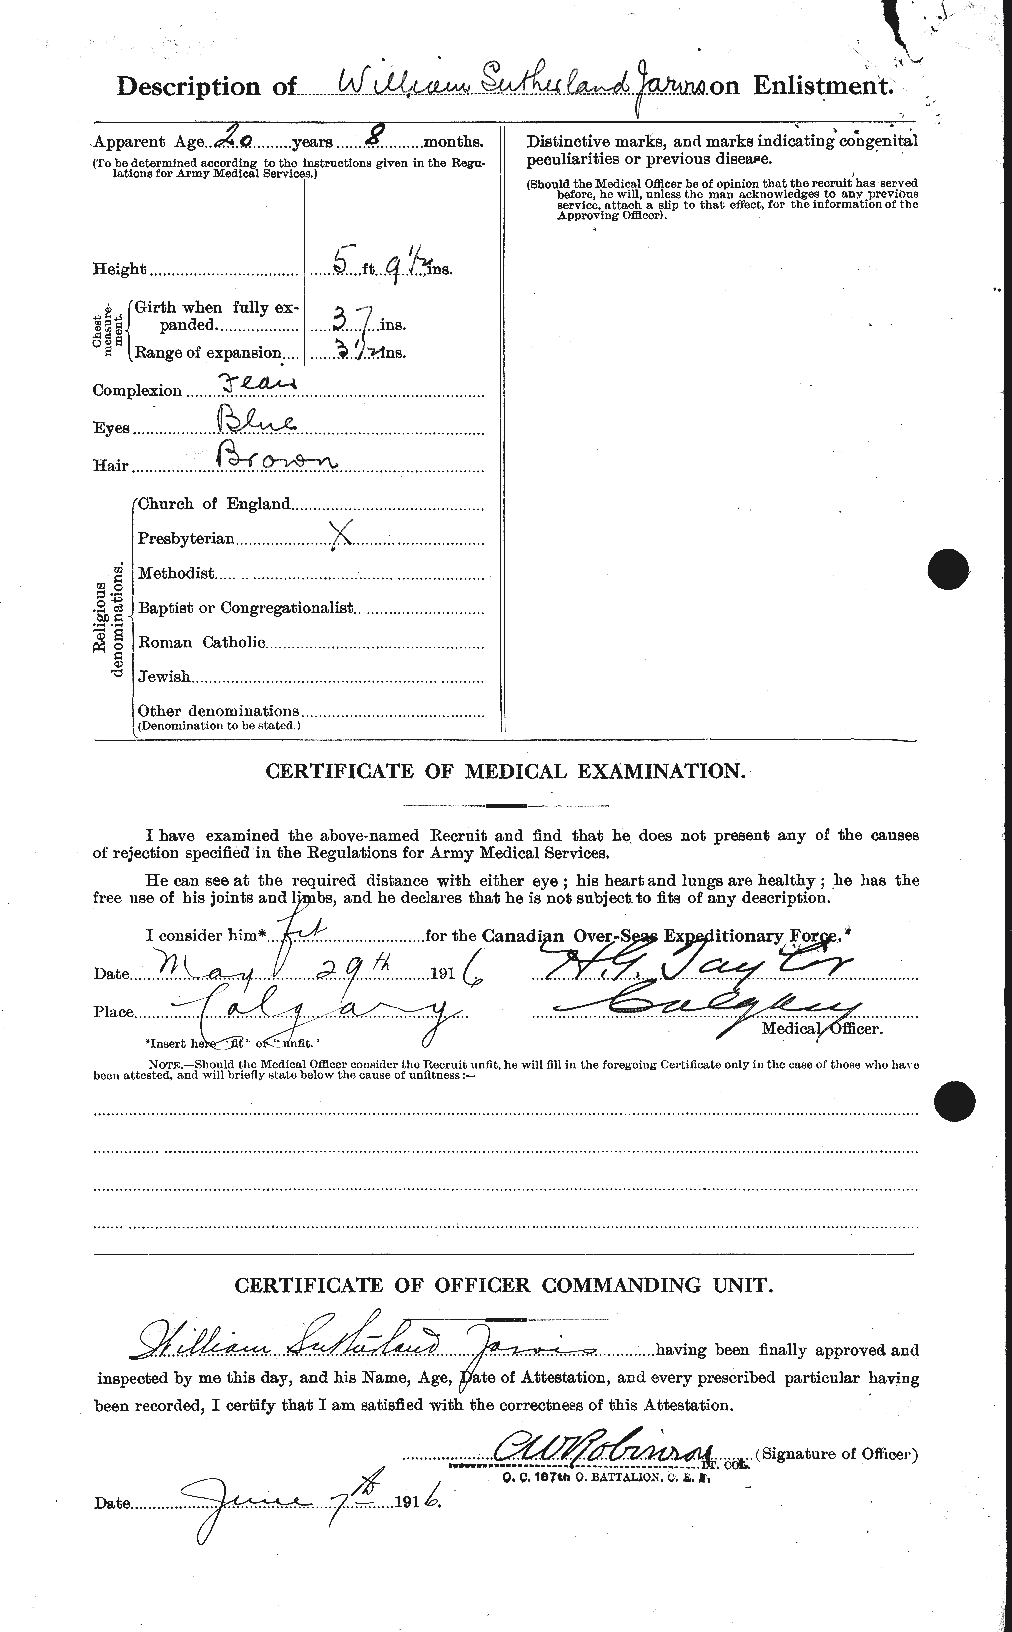 Personnel Records of the First World War - CEF 415894b